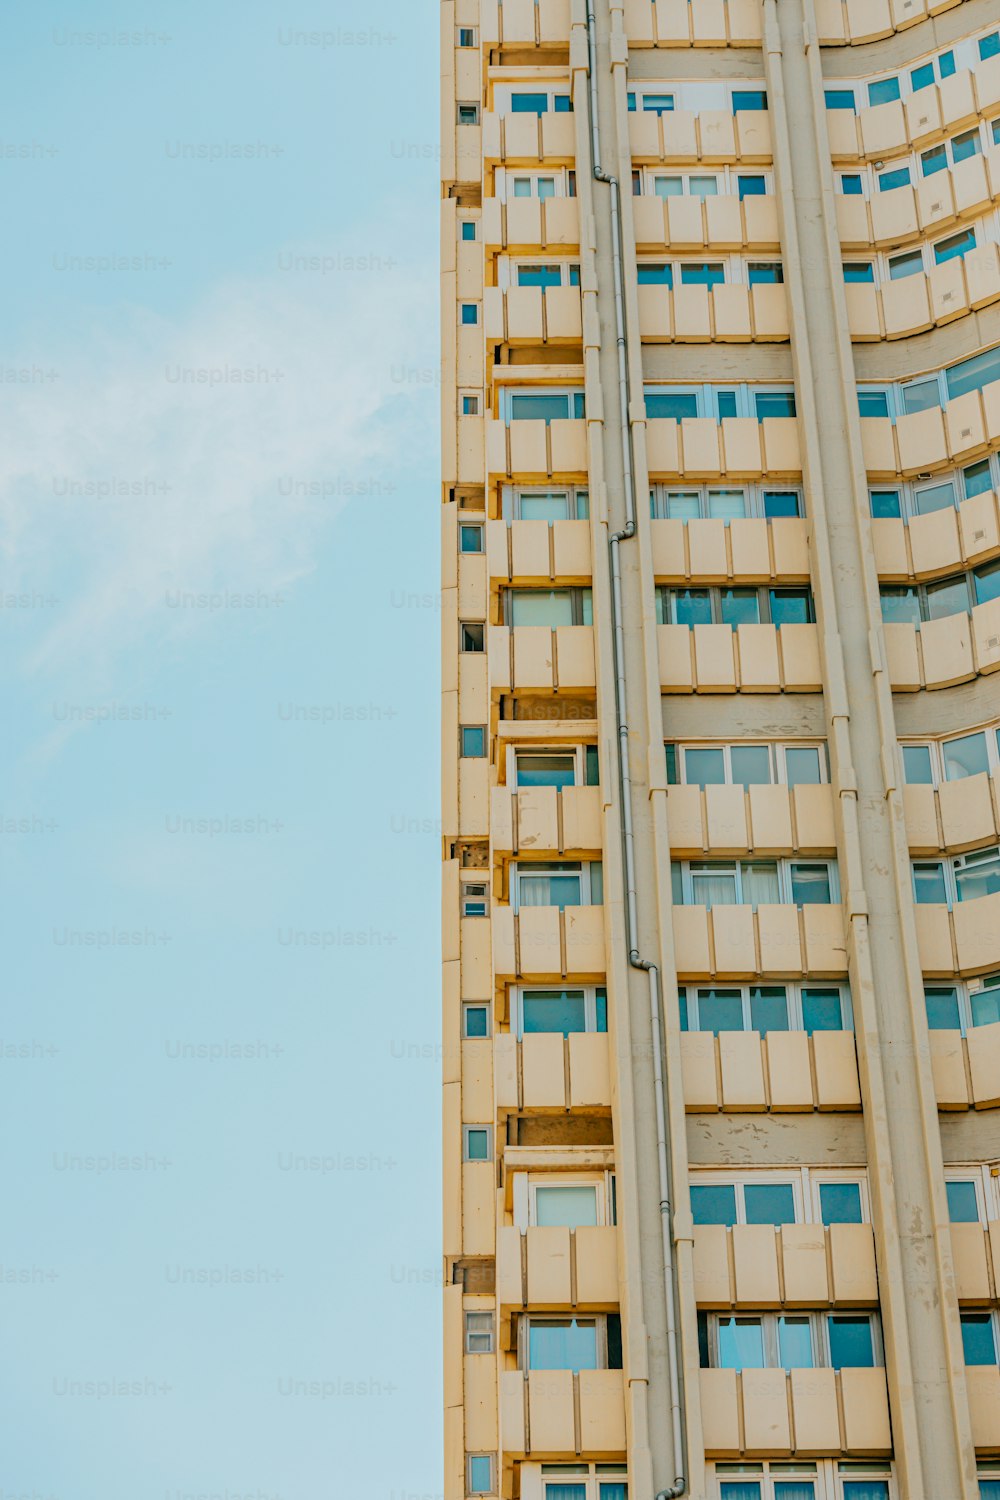 a tall building with windows and balconies against a blue sky